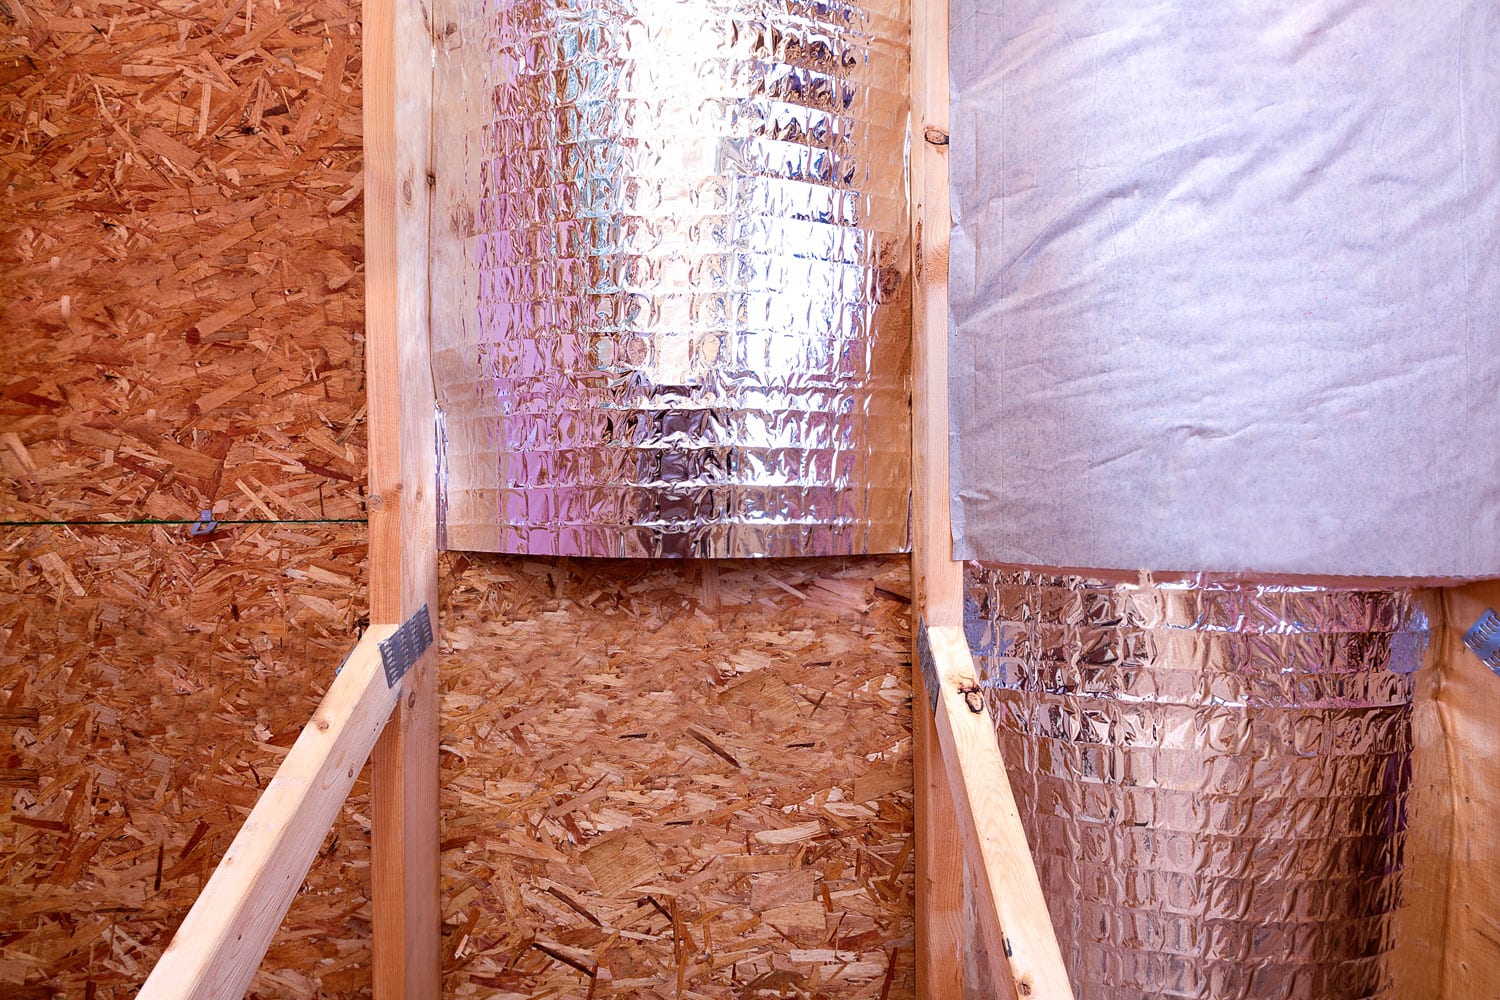 Attic insulating with reflective heat barrier and fiberglass cold barrier between the attic joists